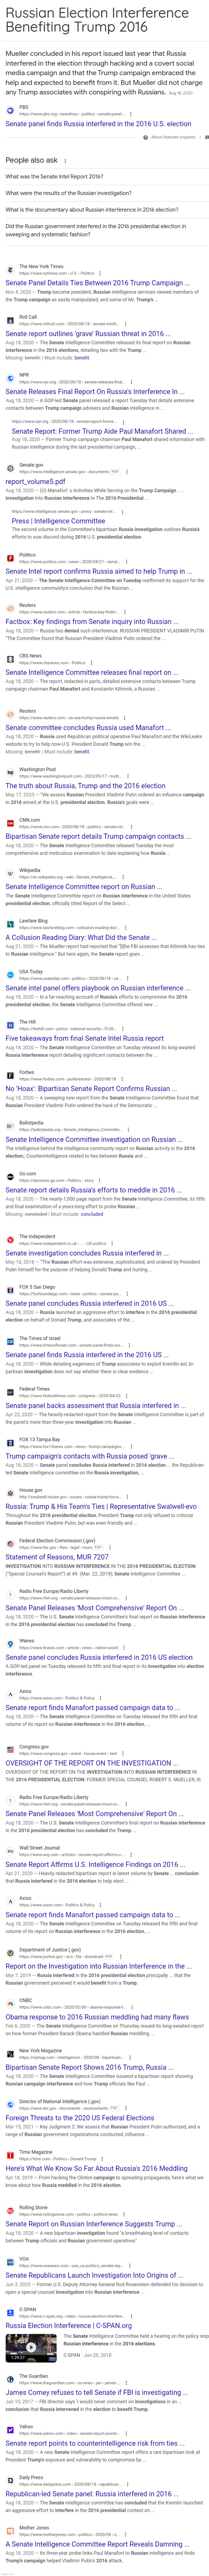 Russian Election Interference Benefiting Trump 2016 | Russian Election Interference
Benefiting Trump 2016 | image tagged in trump russia collusion,trump,russian election interference benefiting trump 2016,donald trump,russian collusion,trump articles | made w/ Imgflip meme maker